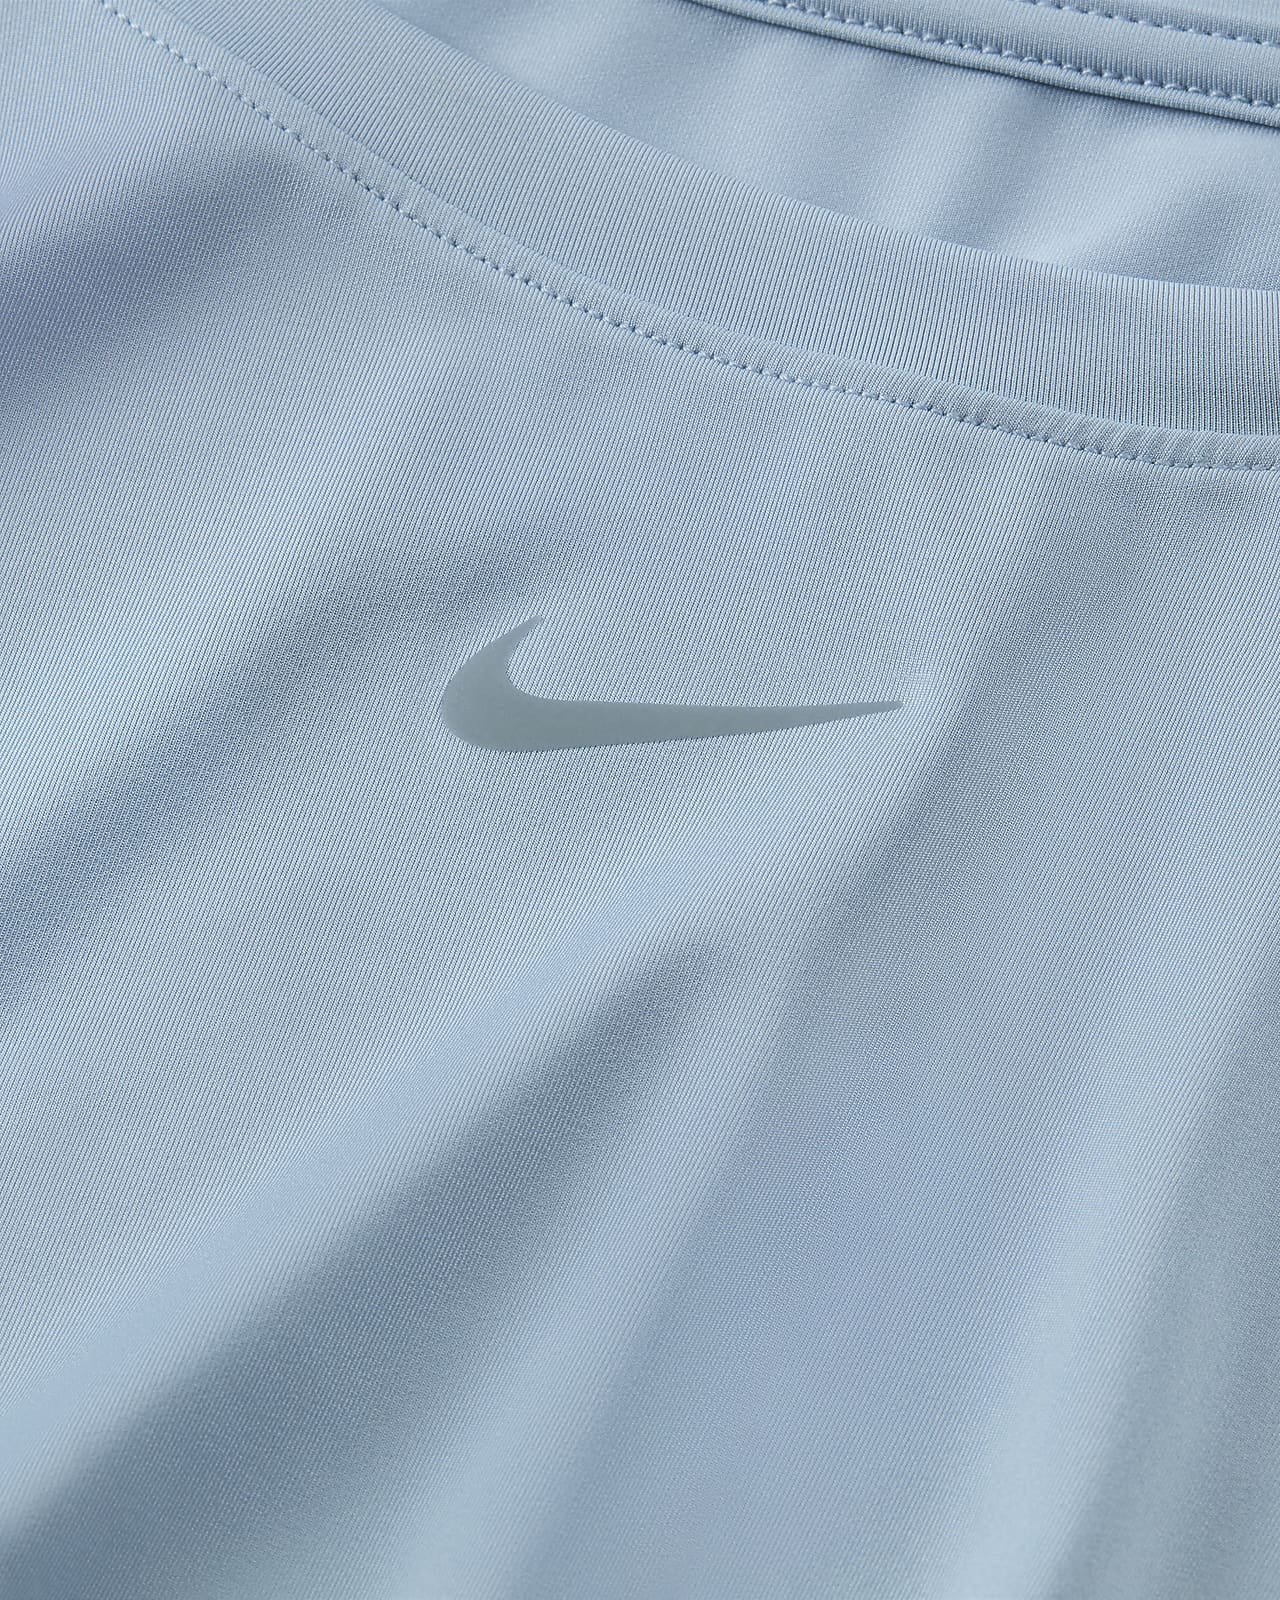 Nike Dri-Fit One Fille special offer